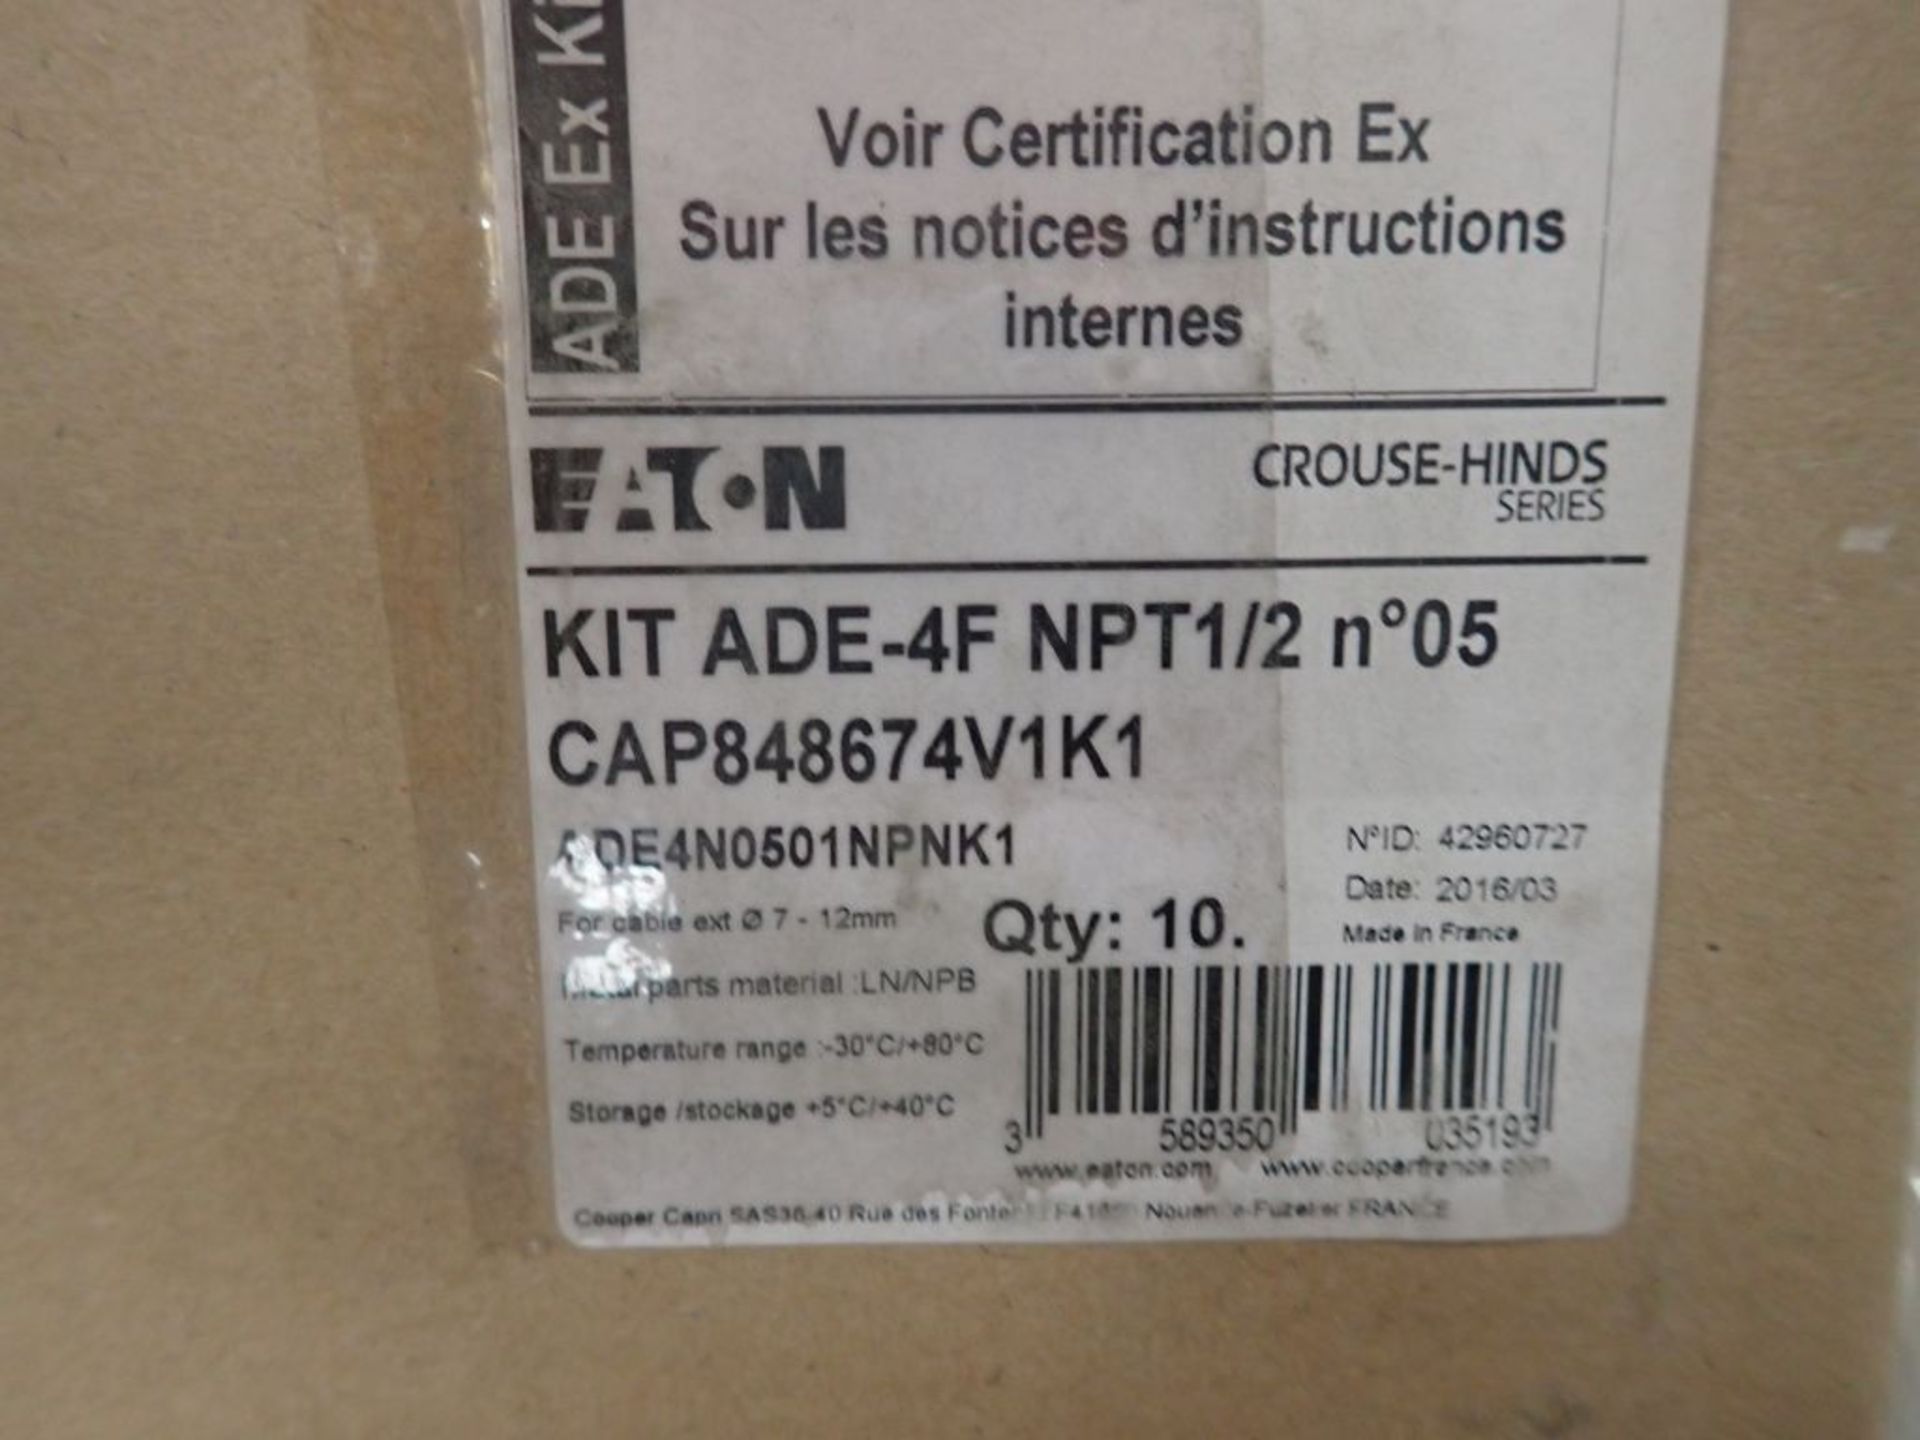 Lot of (2000) Eaton Flameproof Cableglands | Model No. CAP848674V1K1; For Cable 07-12mm; New - Image 5 of 15